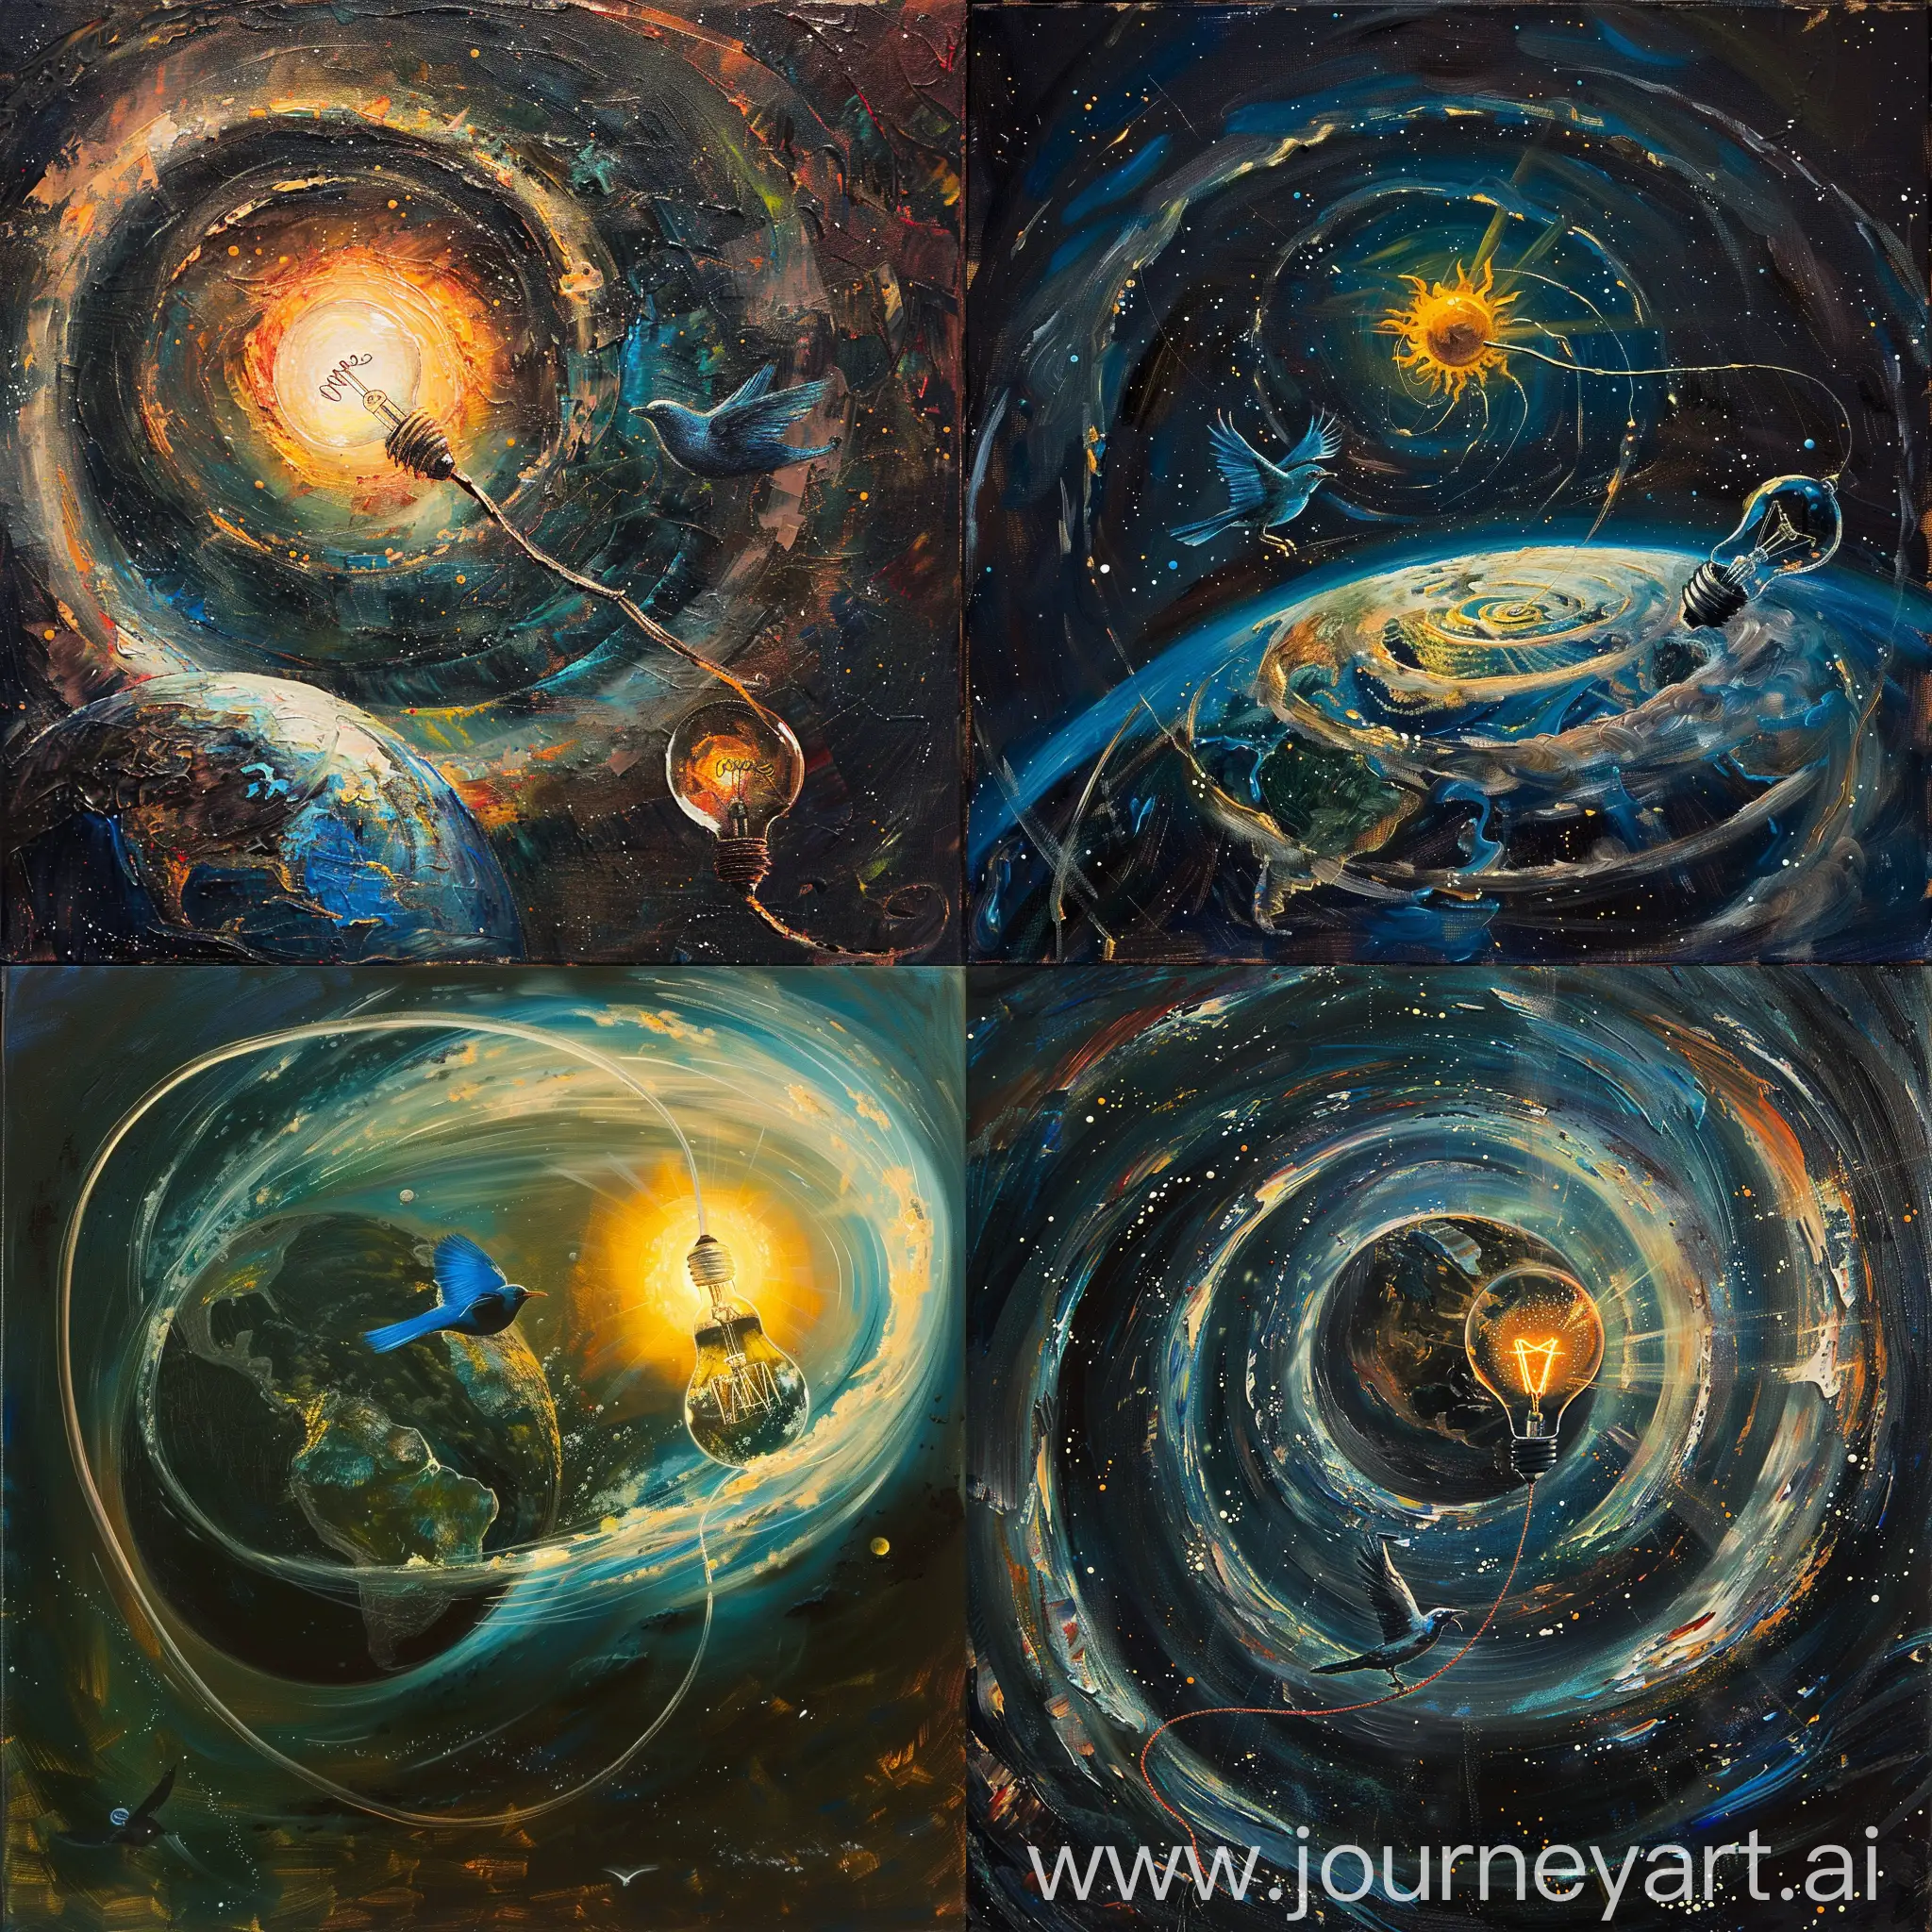 /imagine promt:
in outer space, planet Earth.
An umbilical cord stretches from the planet in a spiral towards the Sun.
The sun is symbolically depicted in the form of an electric light bulb.
Inside the light bulbs, a miniature Bluebird is beating against the glass.
In Renaissance style.
Oil paints, expressive brushstroke technique.
--ar 16:9